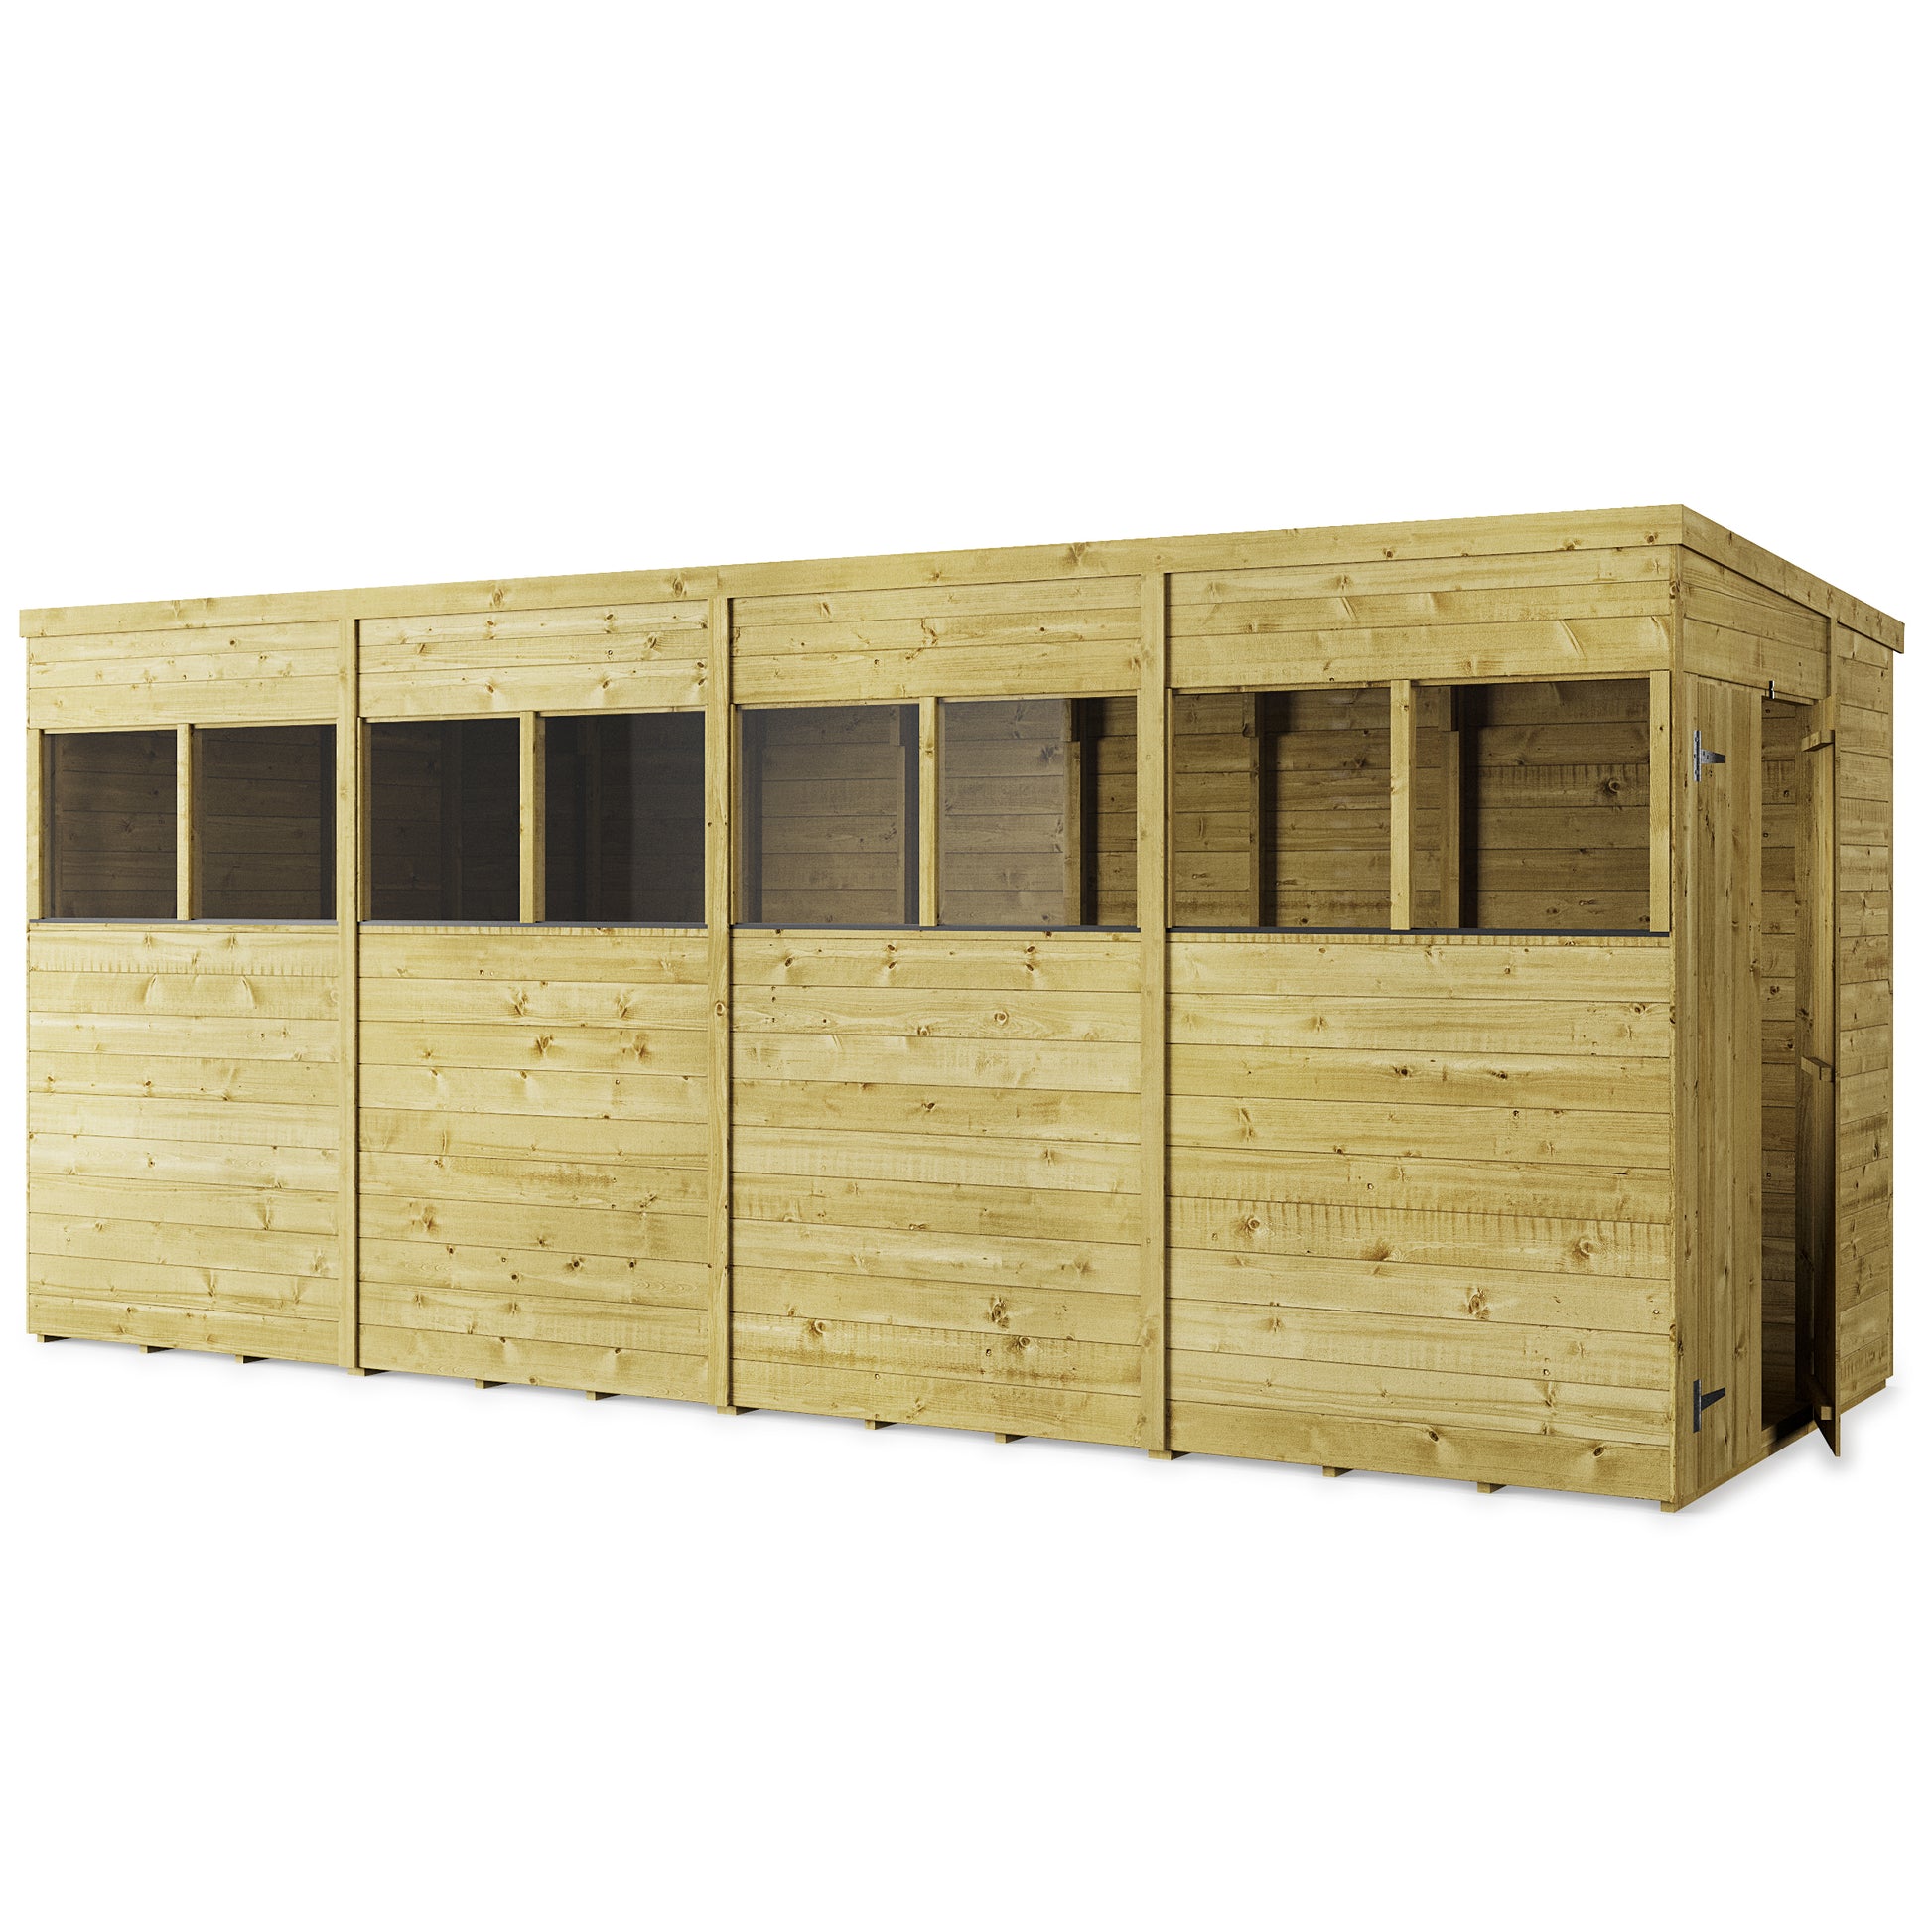 Store More 16 x 6 Tongue and Groove Pent Shed Windowed - Premium Garden